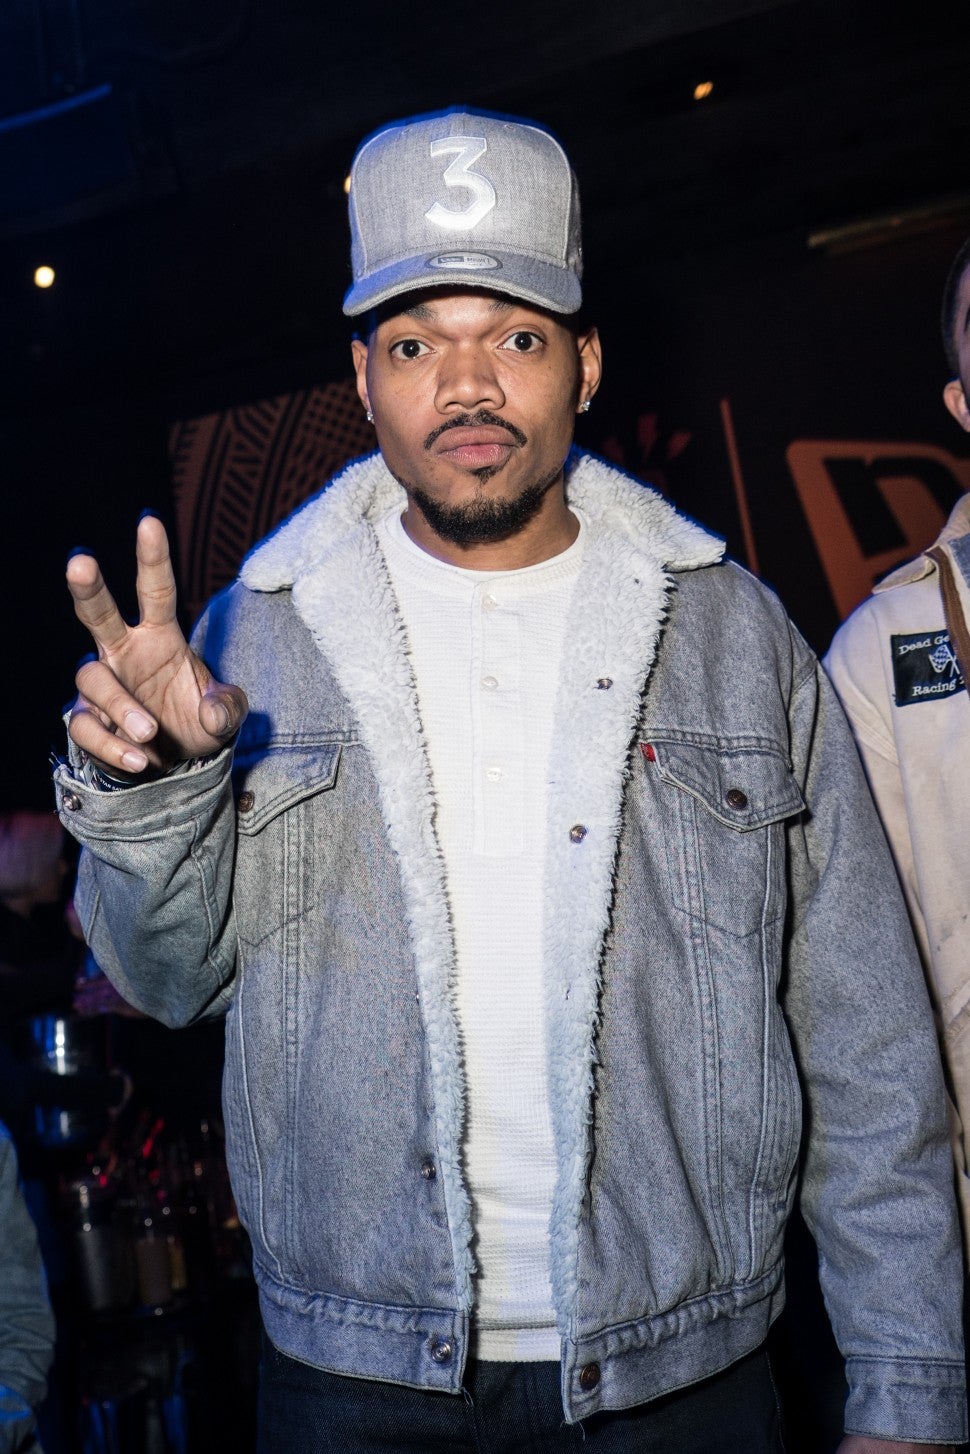 Chance the Rapper at new era party